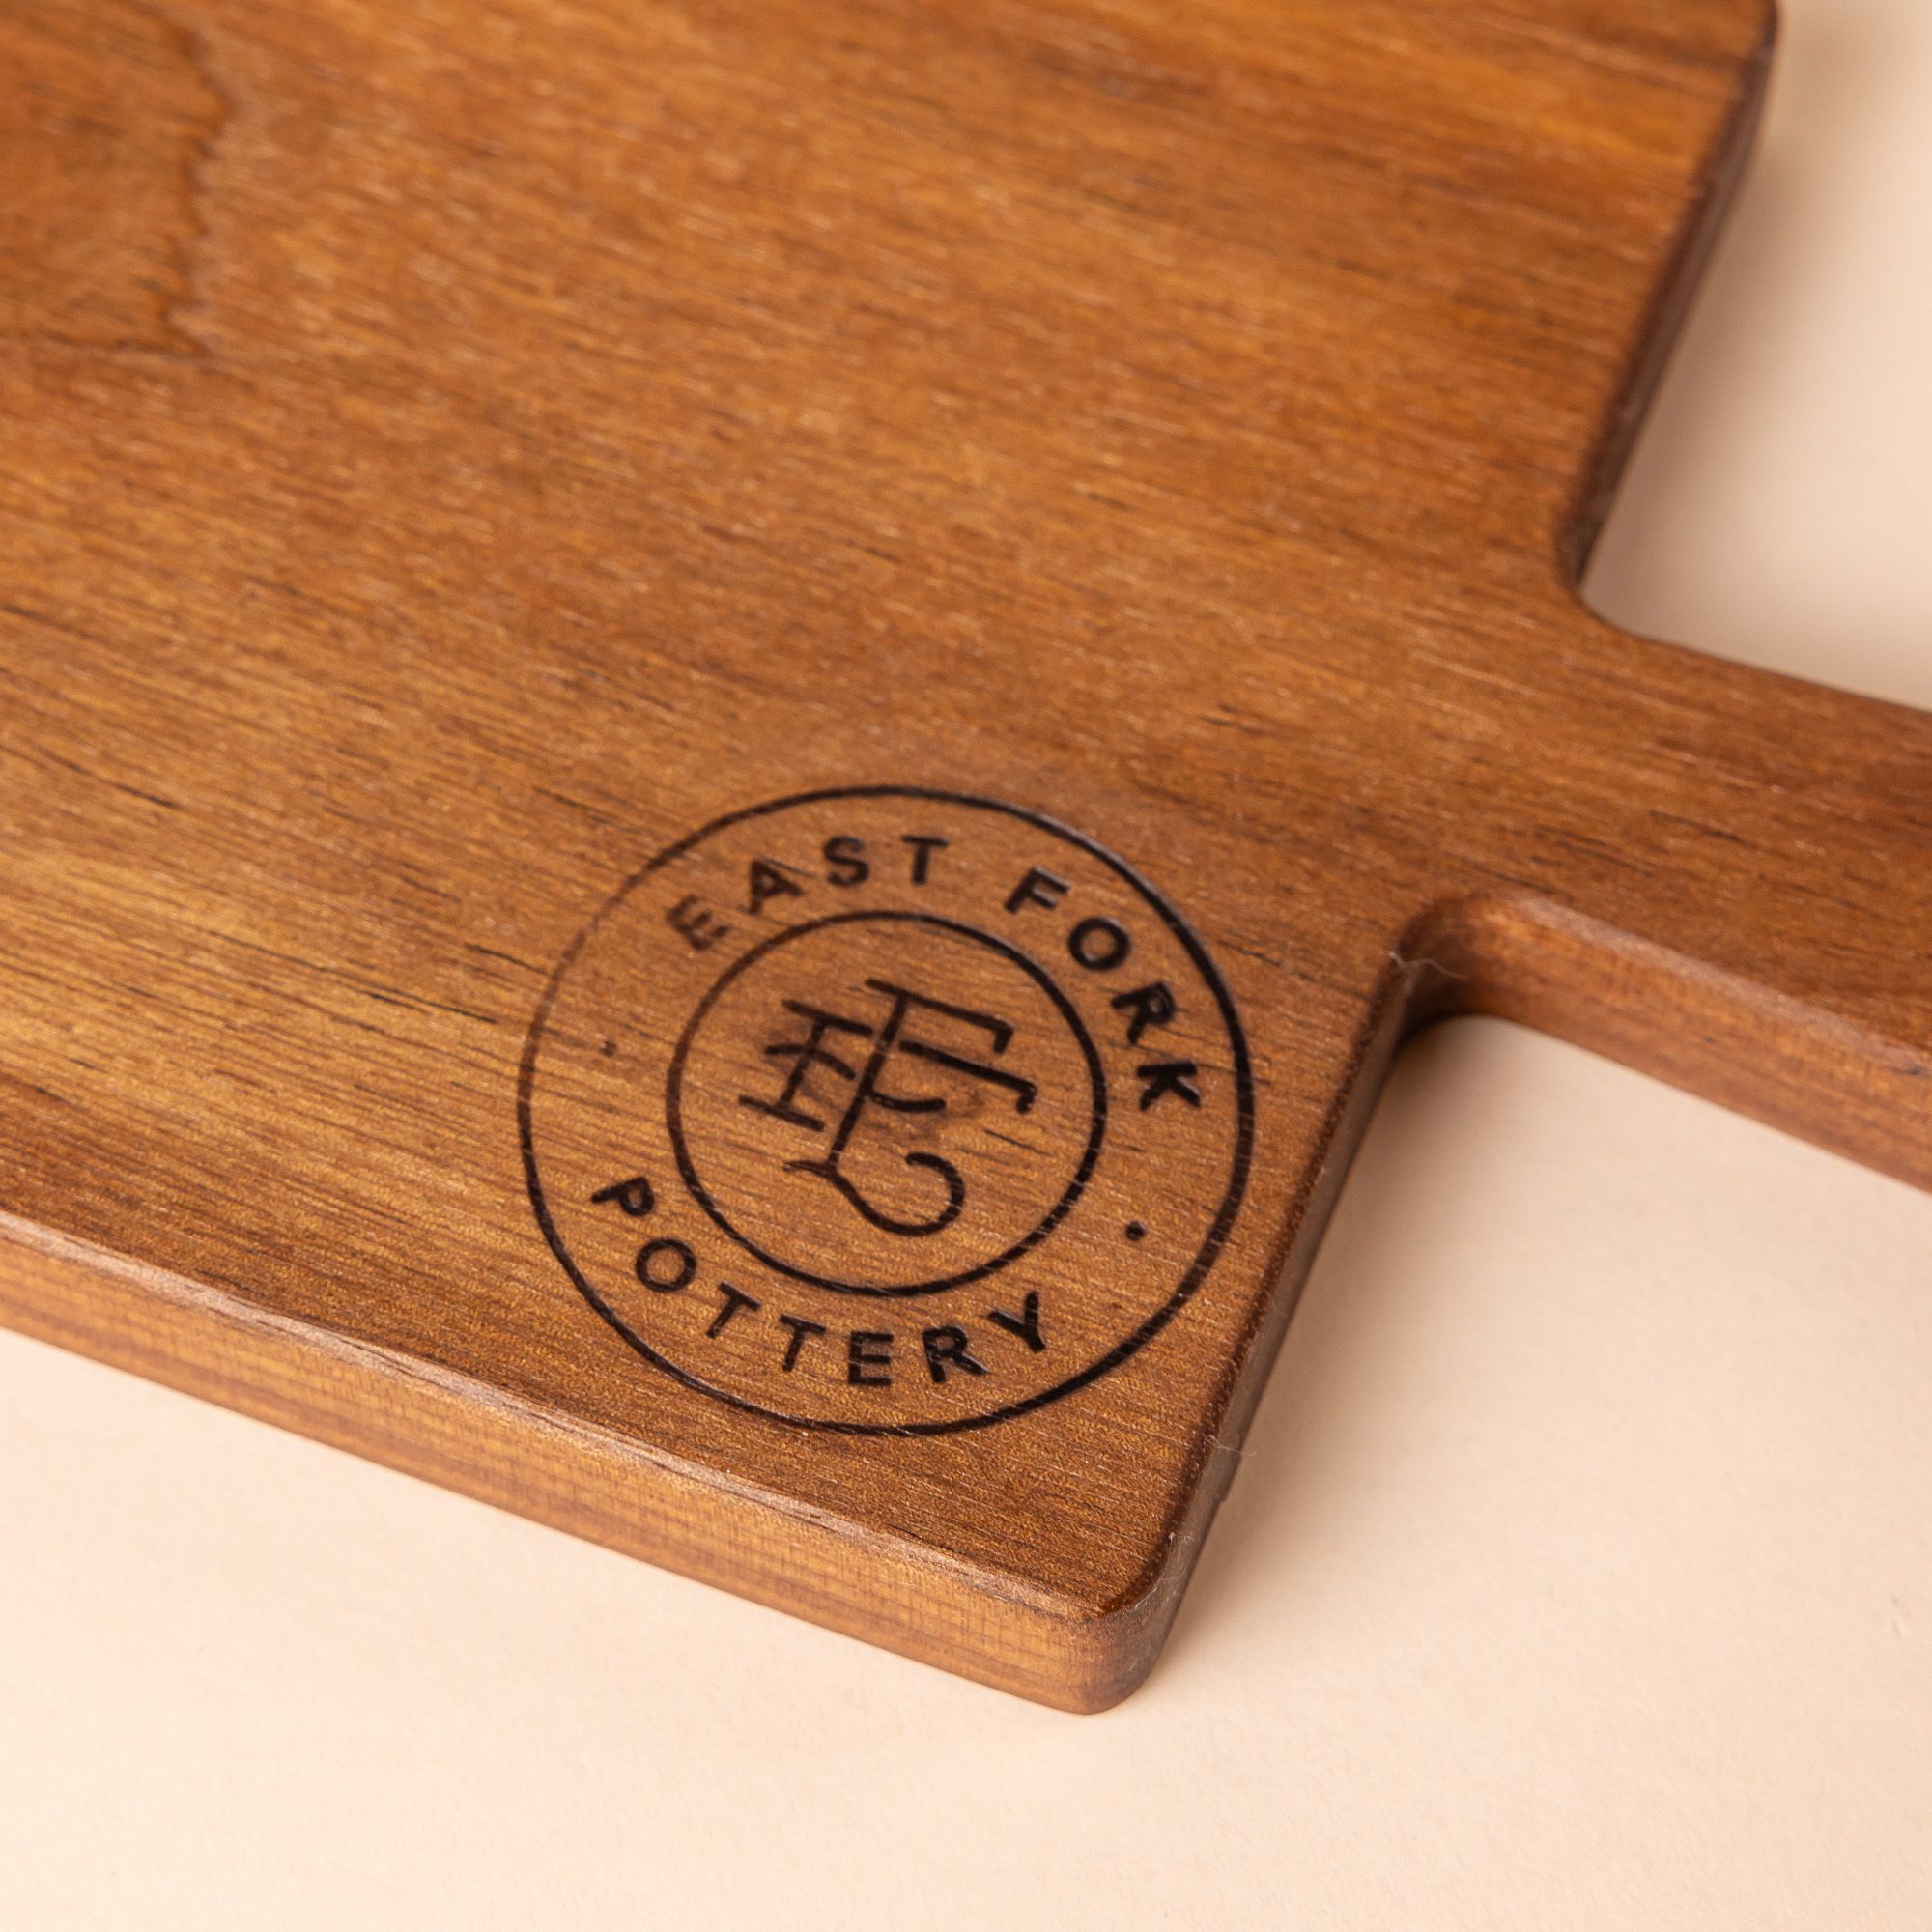 Close up of a stamp on the corner of a wooden bread board. The stamp has a circle with an EF logo and reads "East Fork Pottery".